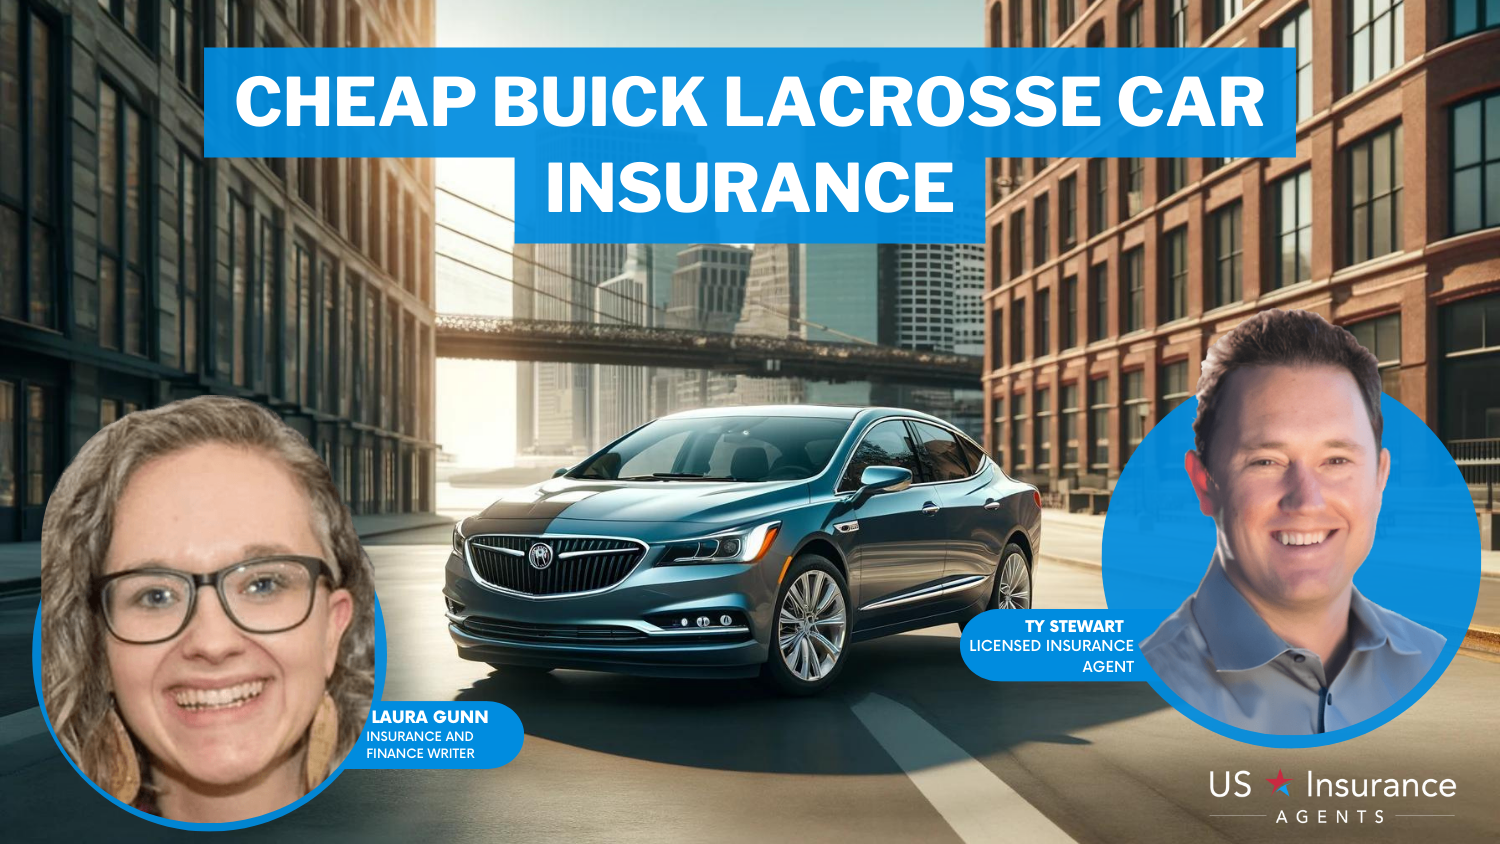 Cheap Buick LaCrosse Car Insurance: Auto-Owners, Erie, and Nationwide.